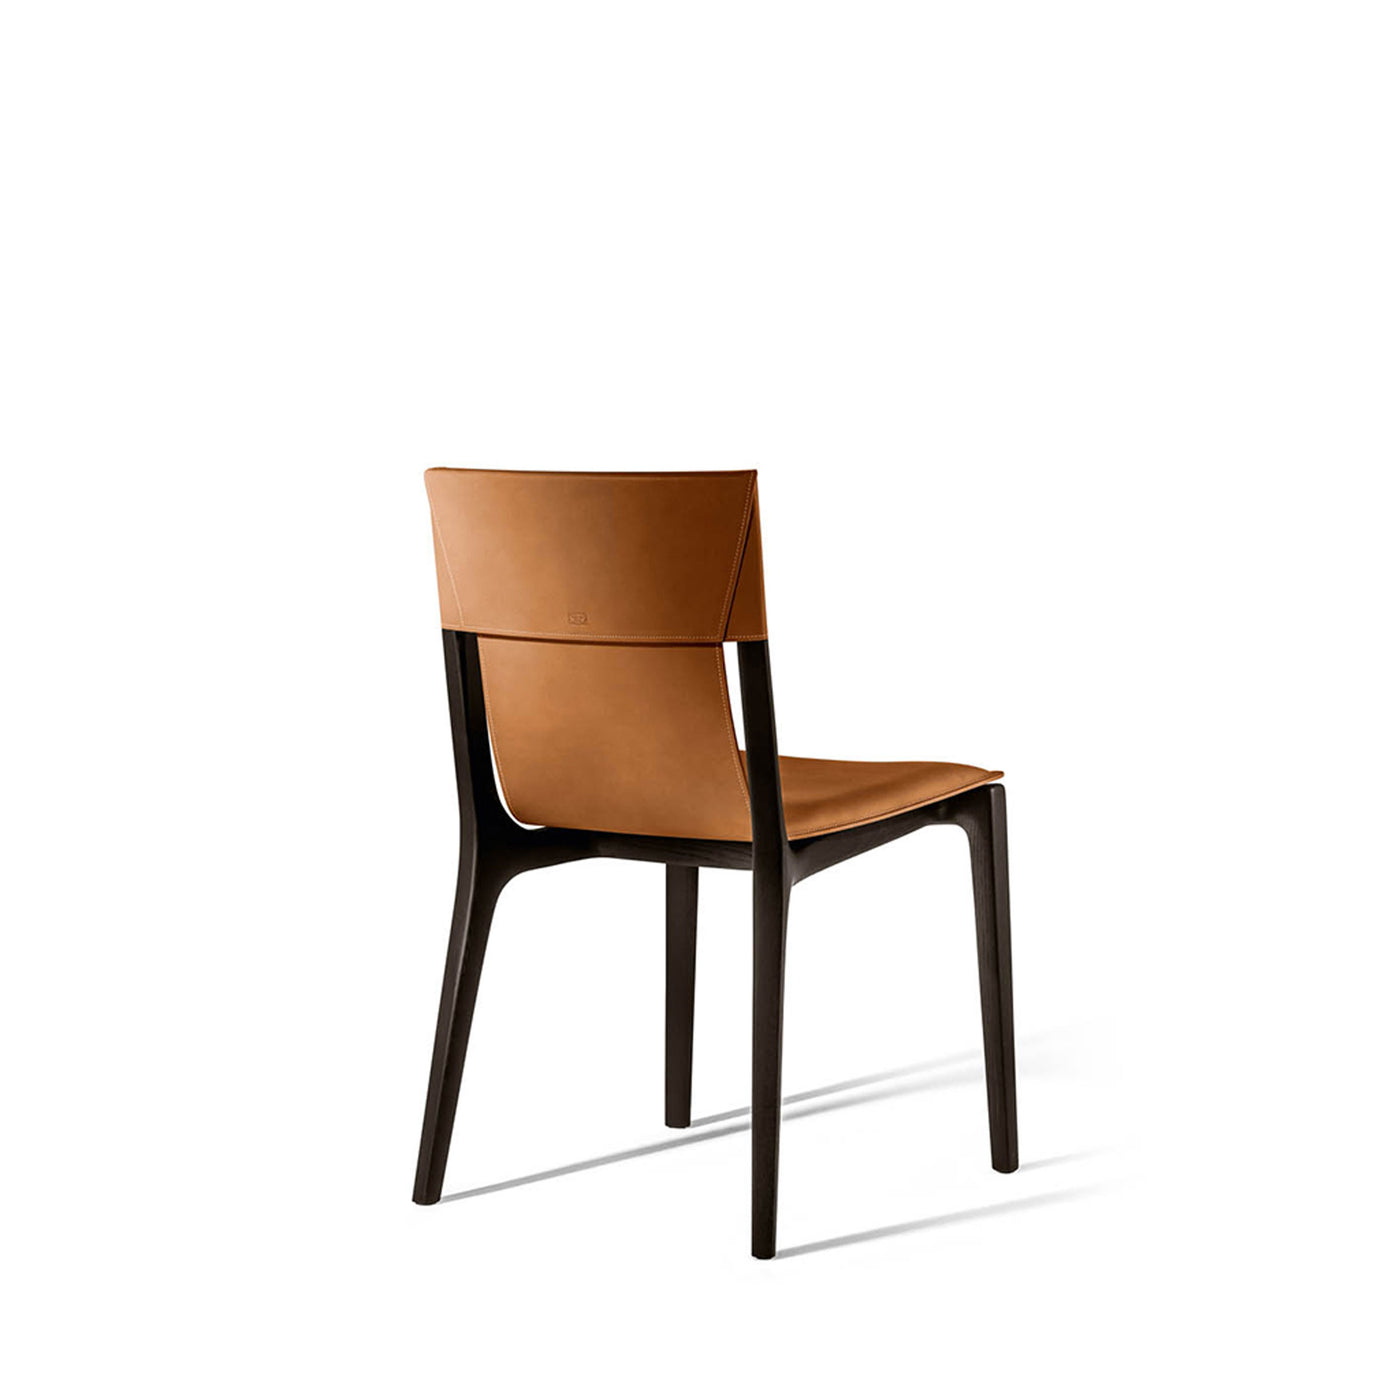 Leather Dining Chair ISADORA by Roberto Lazzeroni for Poltrona Frau 03